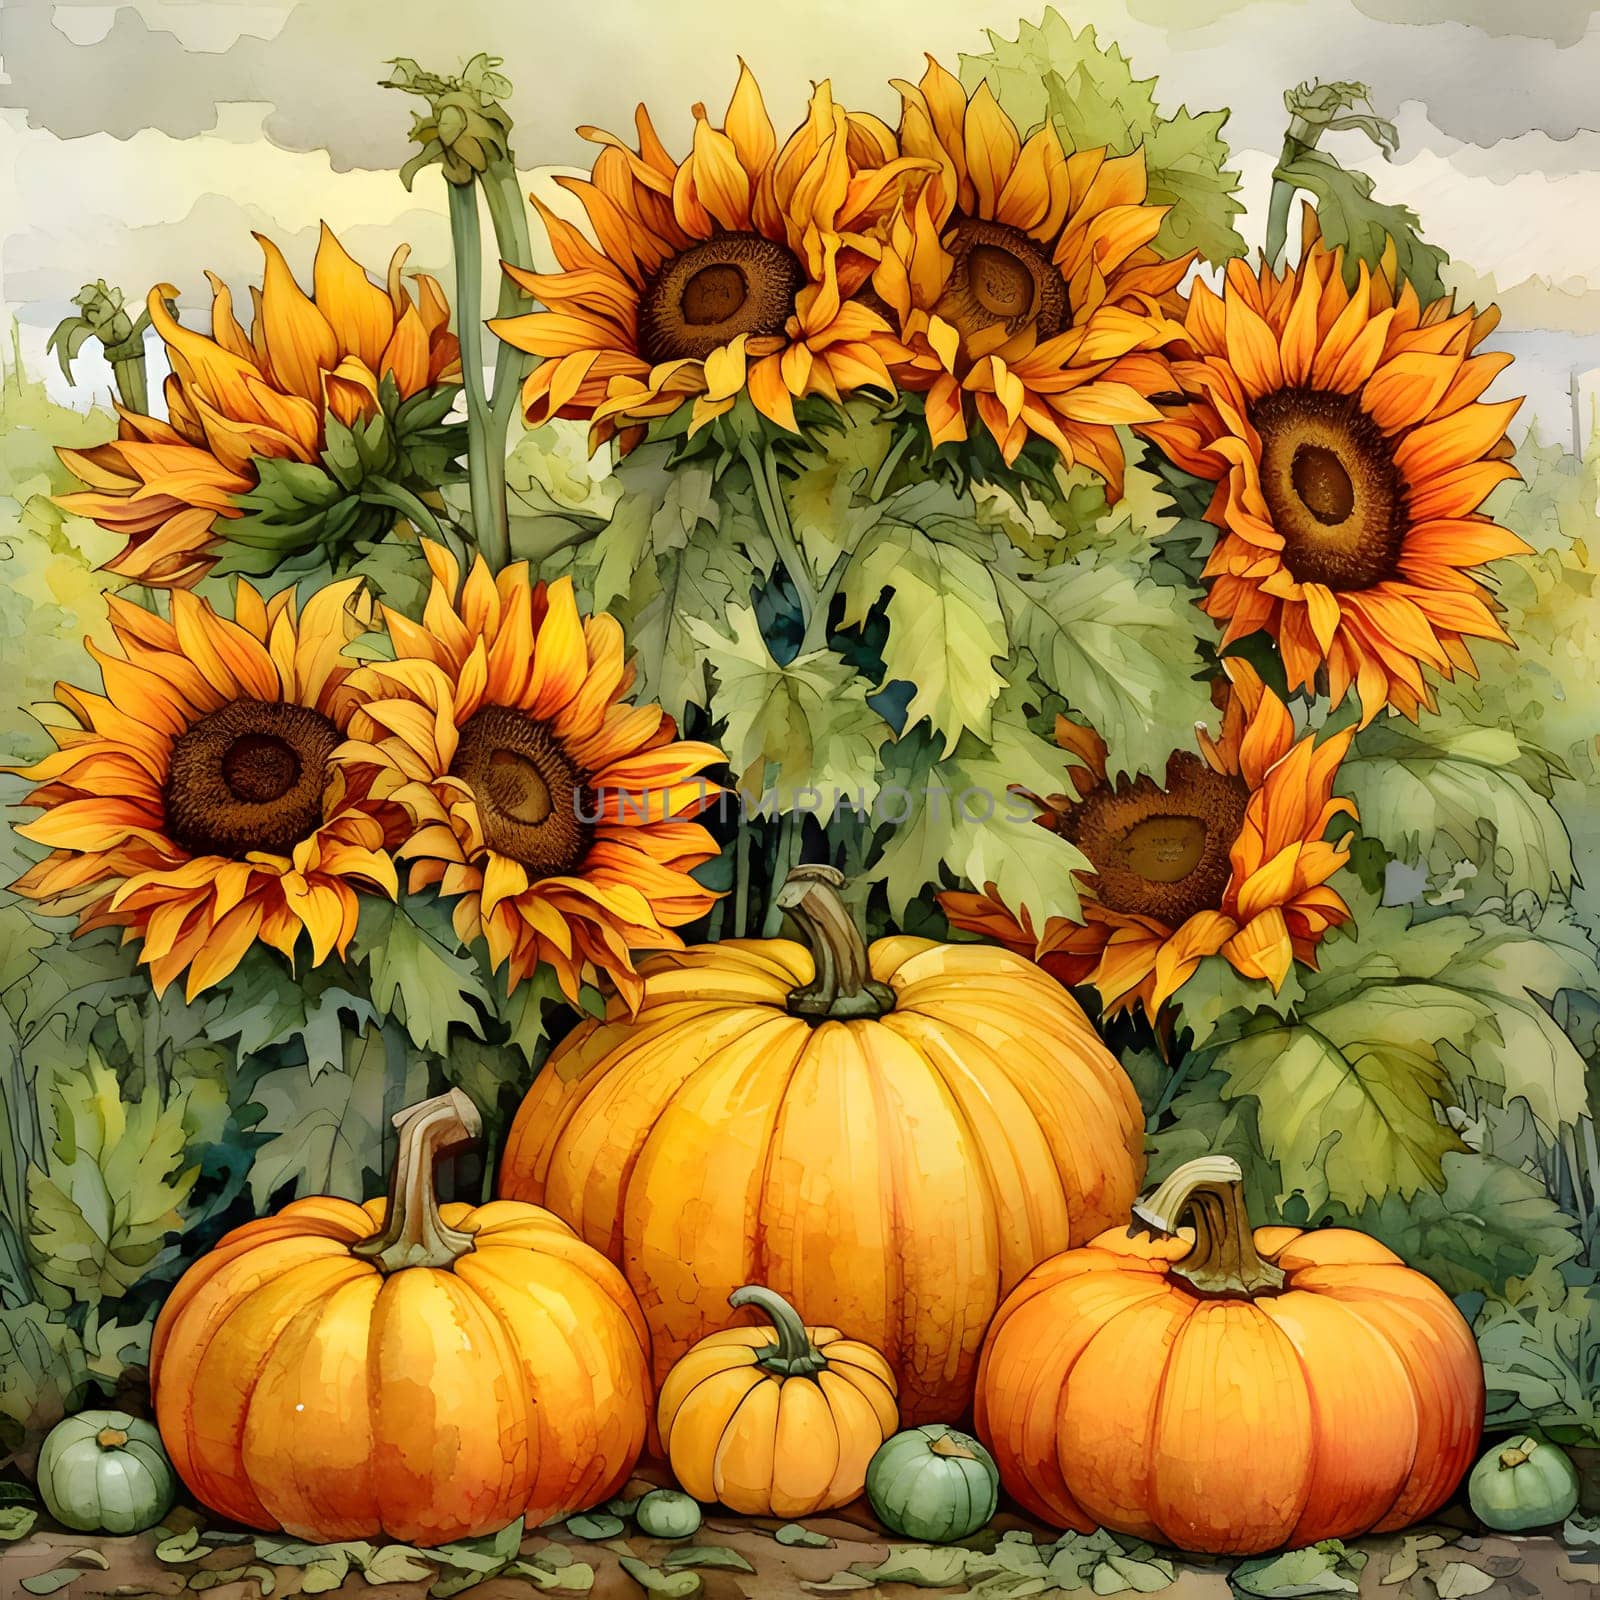 Illustration, sunflowers and pumpkins under them. Pumpkin as a dish of thanksgiving for the harvest. by ThemesS